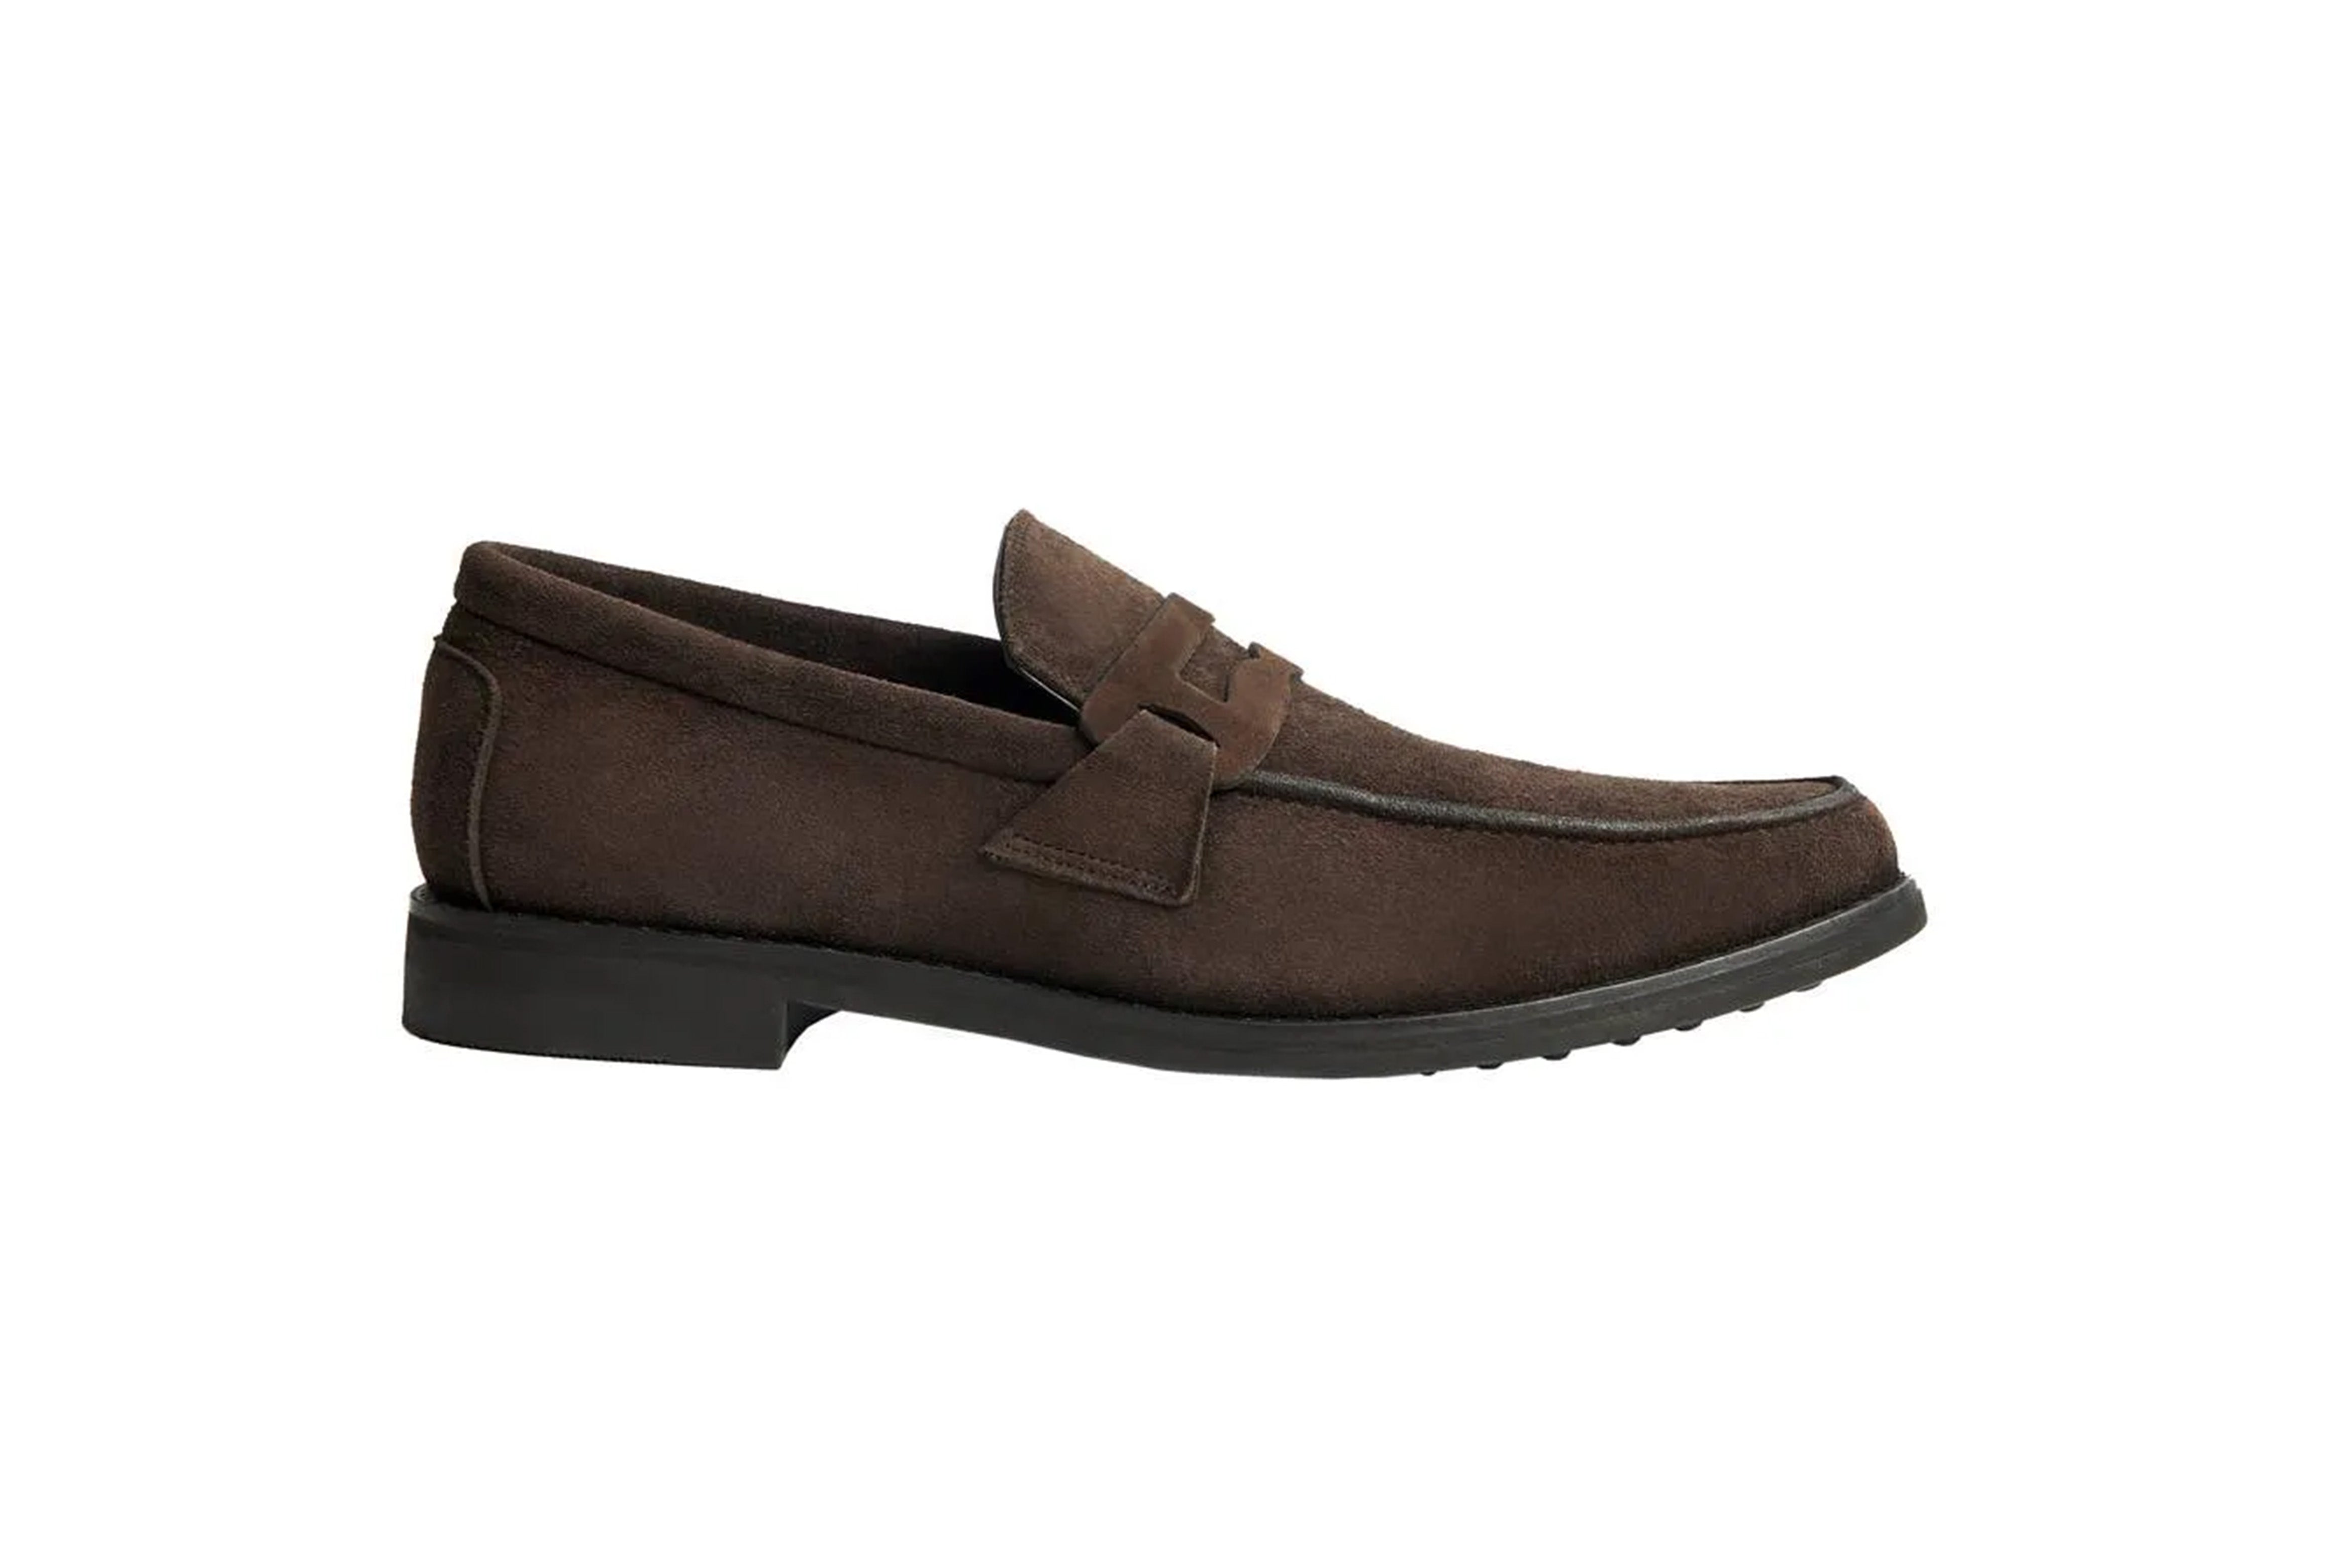 Moccasin Loafer- Zaragoza Suede Coffee Brown